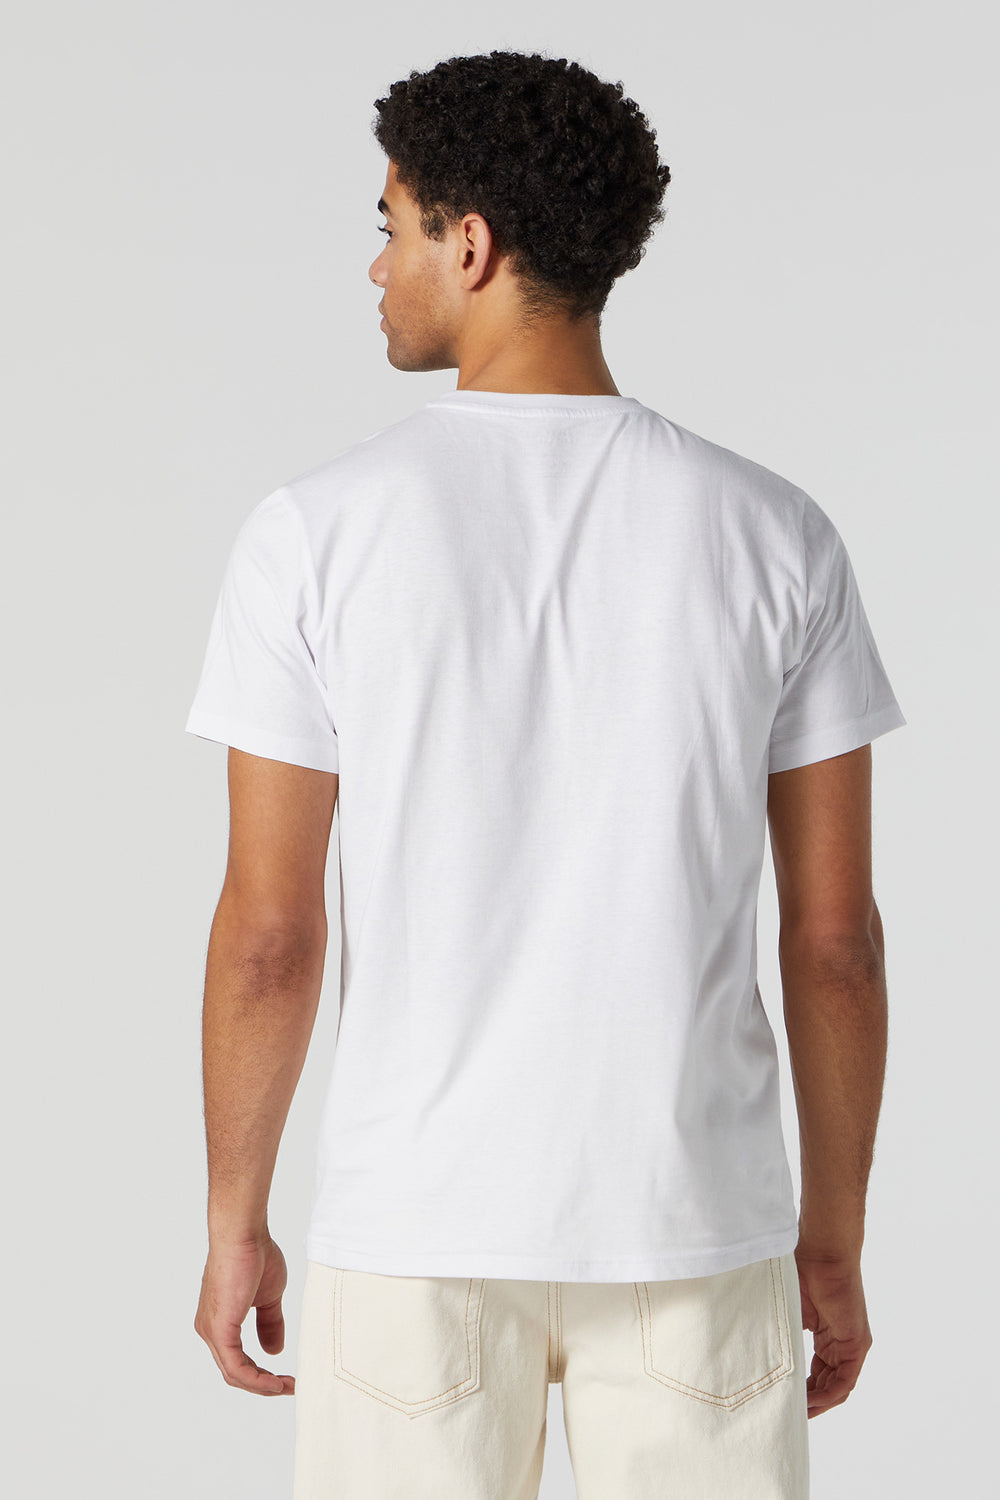 Chest Pocket Solid T-Shirt Chest Pocket Solid T-Shirt 5